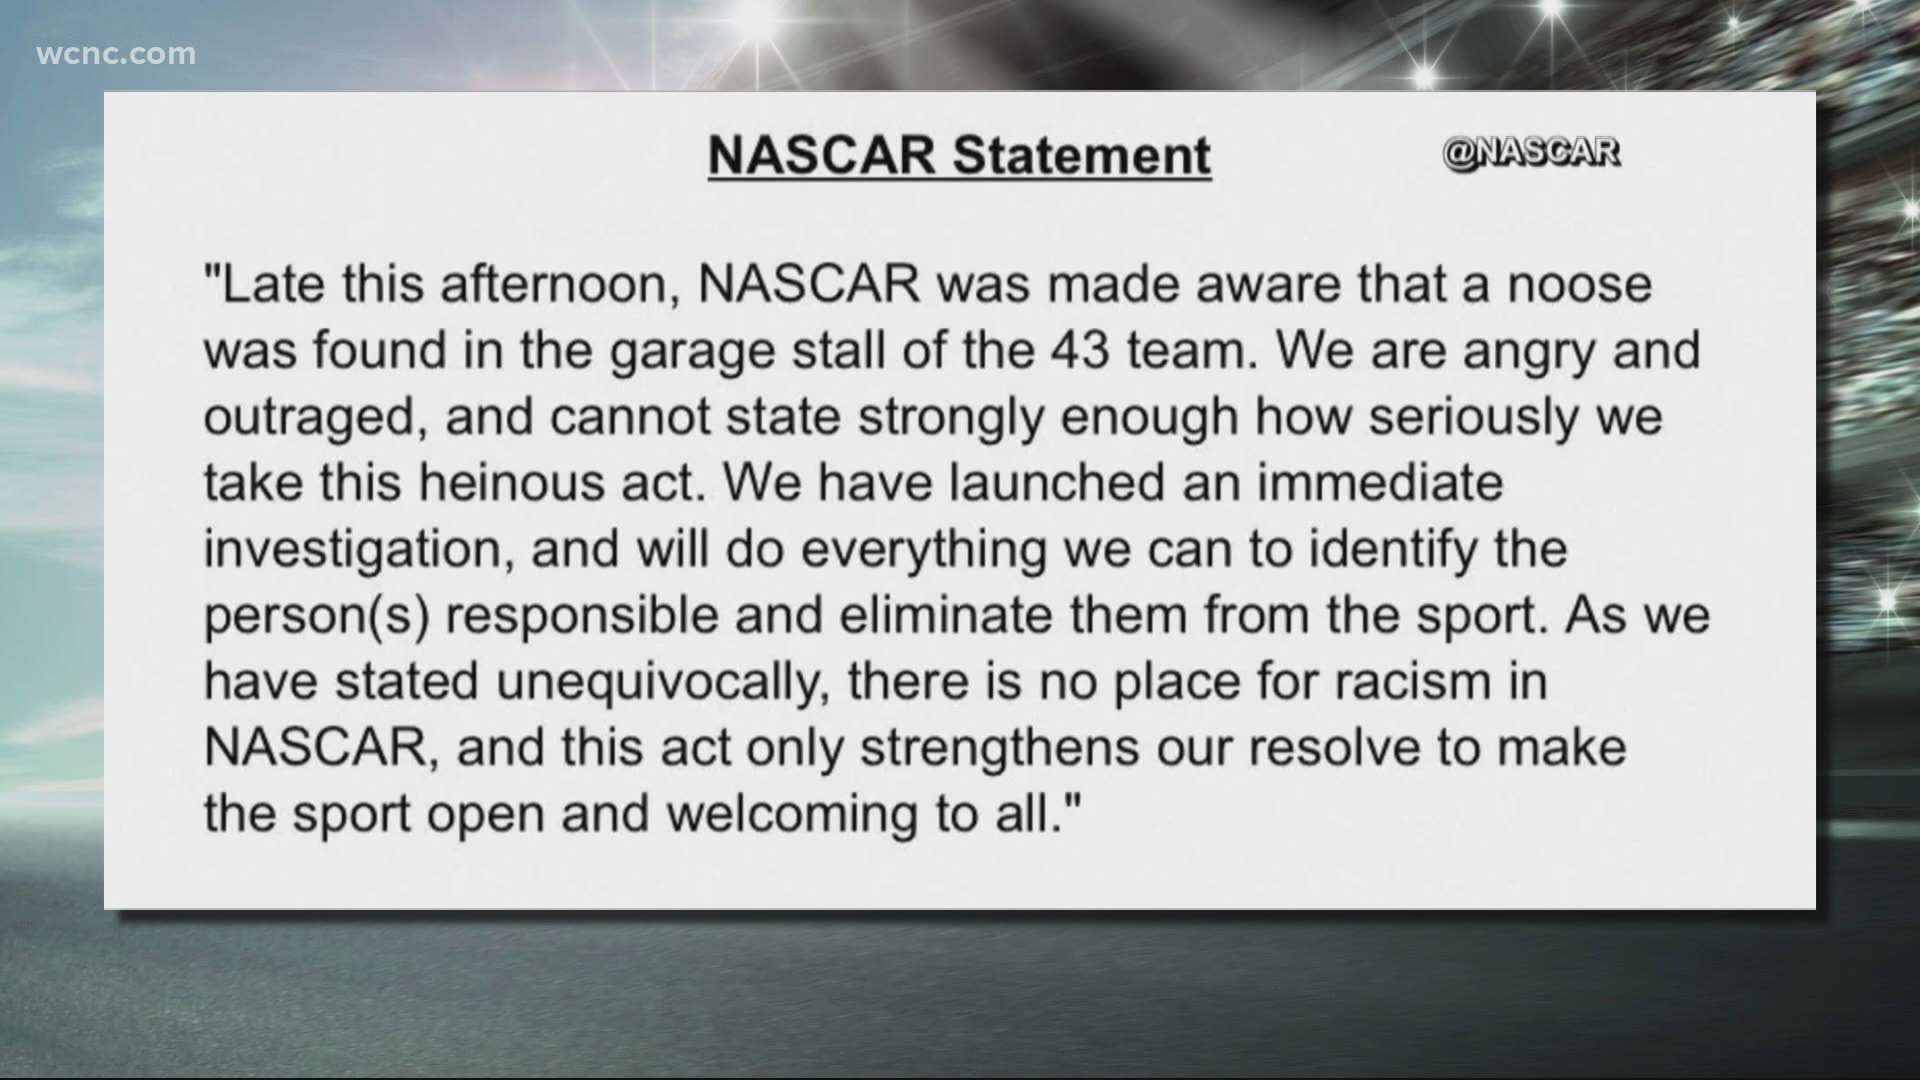 NASCAR has launched an investigation after it says a noose was found in the garage stall of Bubba Wallace at Talladega Superspeedway.